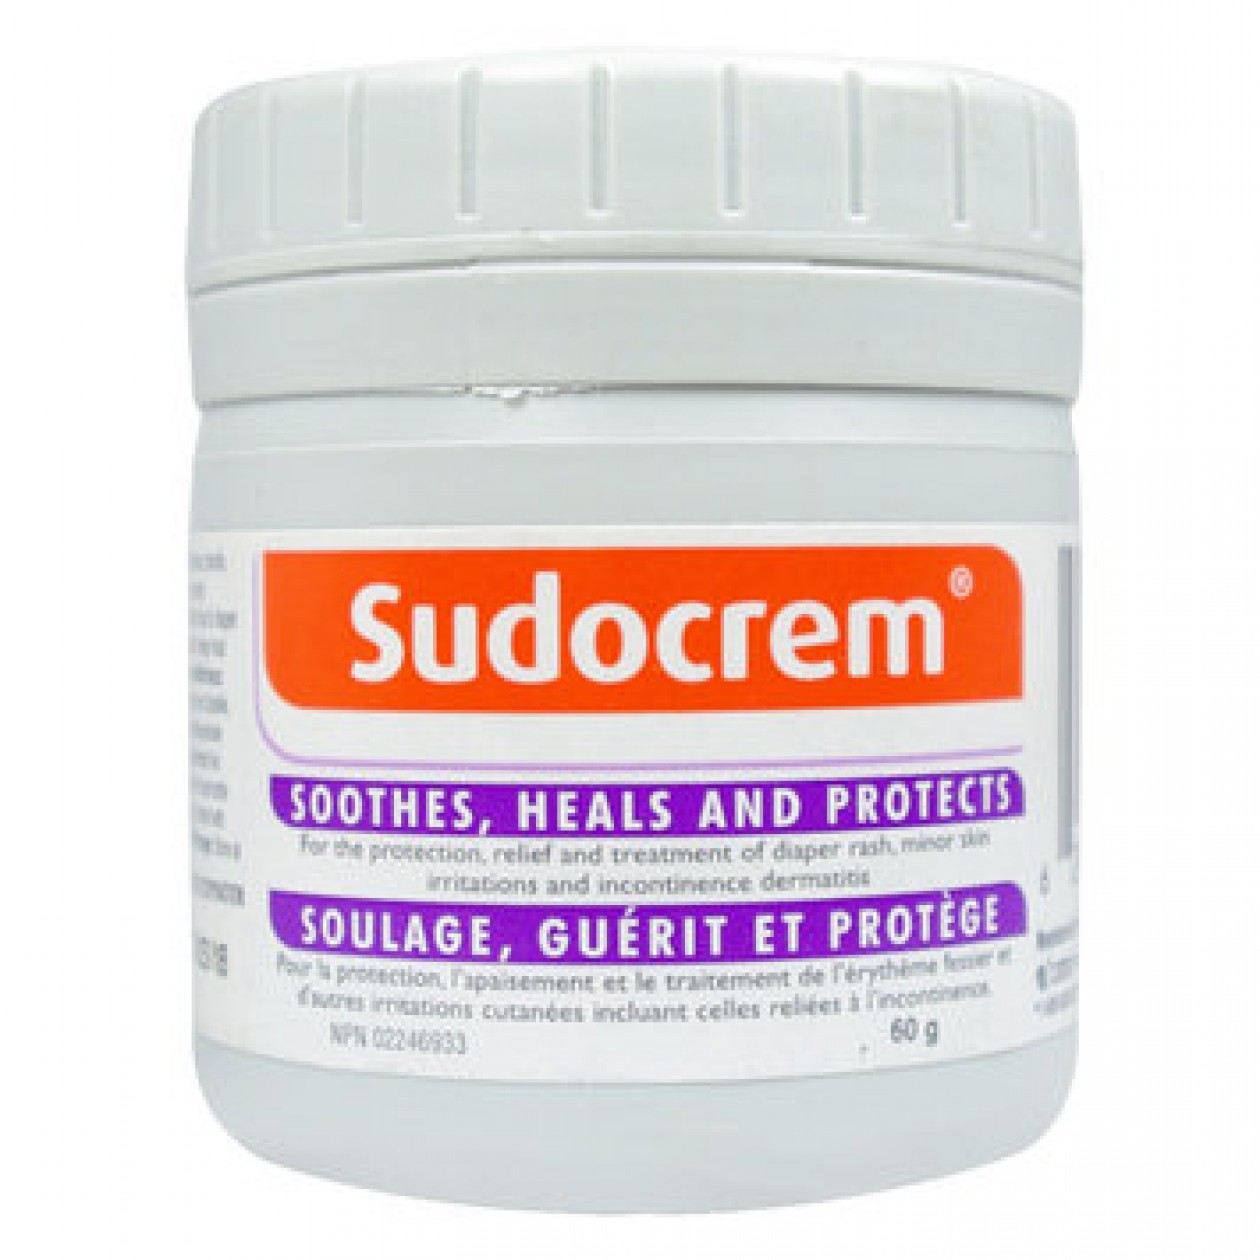 Sudocrem Diaper Rash Cream - Soothes, Heals and Protects 60g